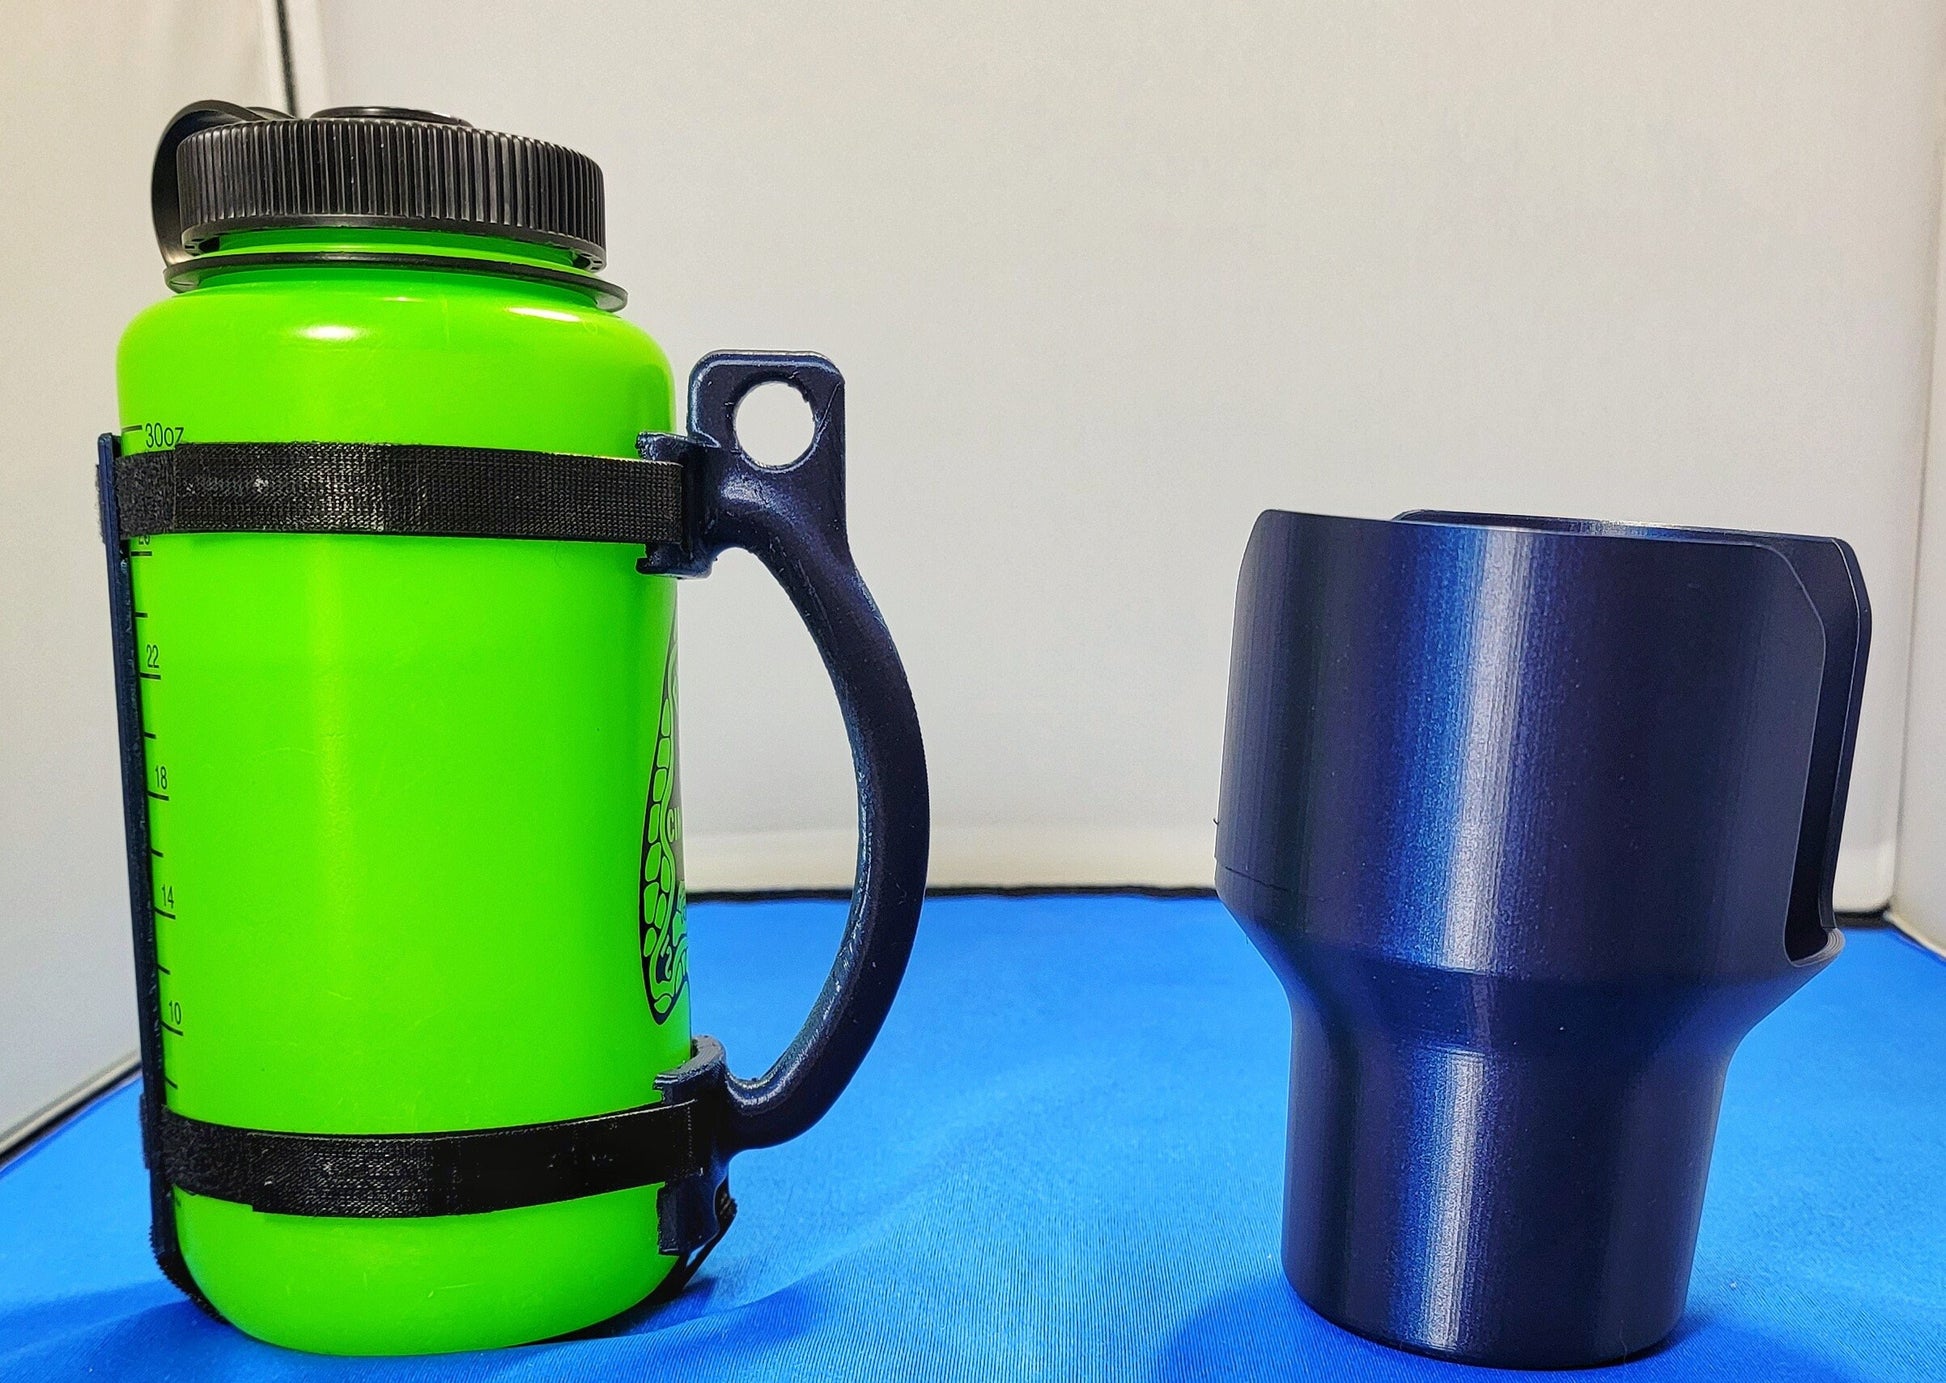 Hydroflask car cup holder adapter